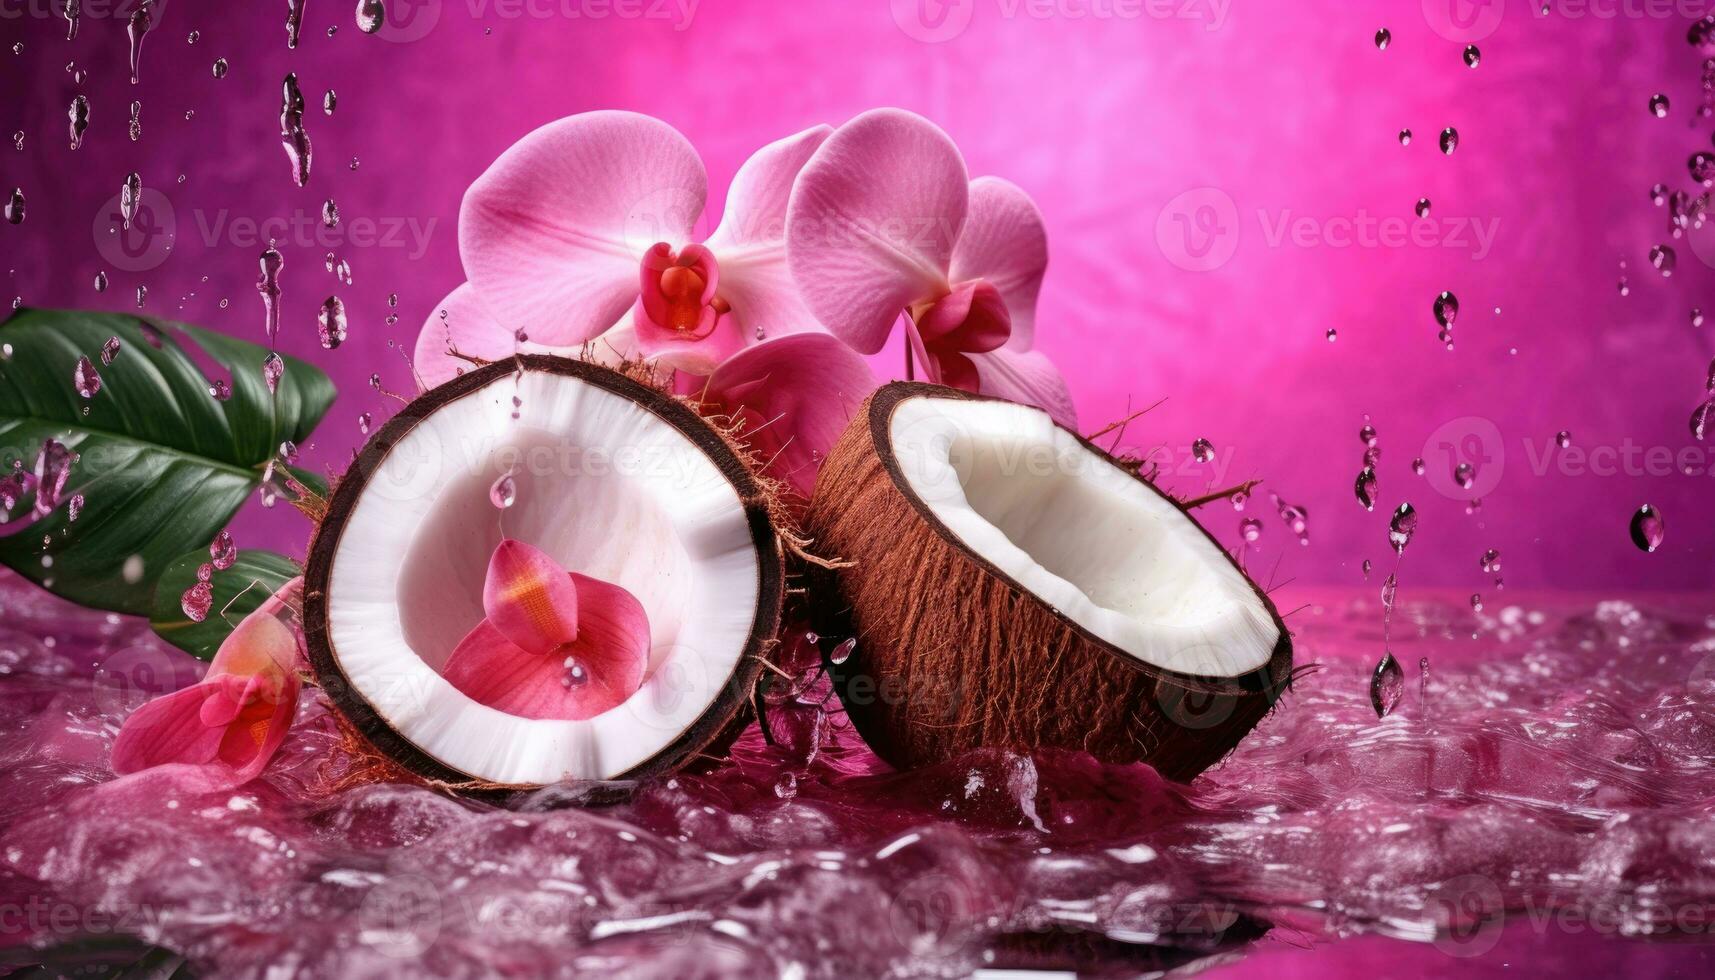 Fresh juicy coconut halves, palm leaves and flowers painted in metallic pink with water droplets. AI generated photo